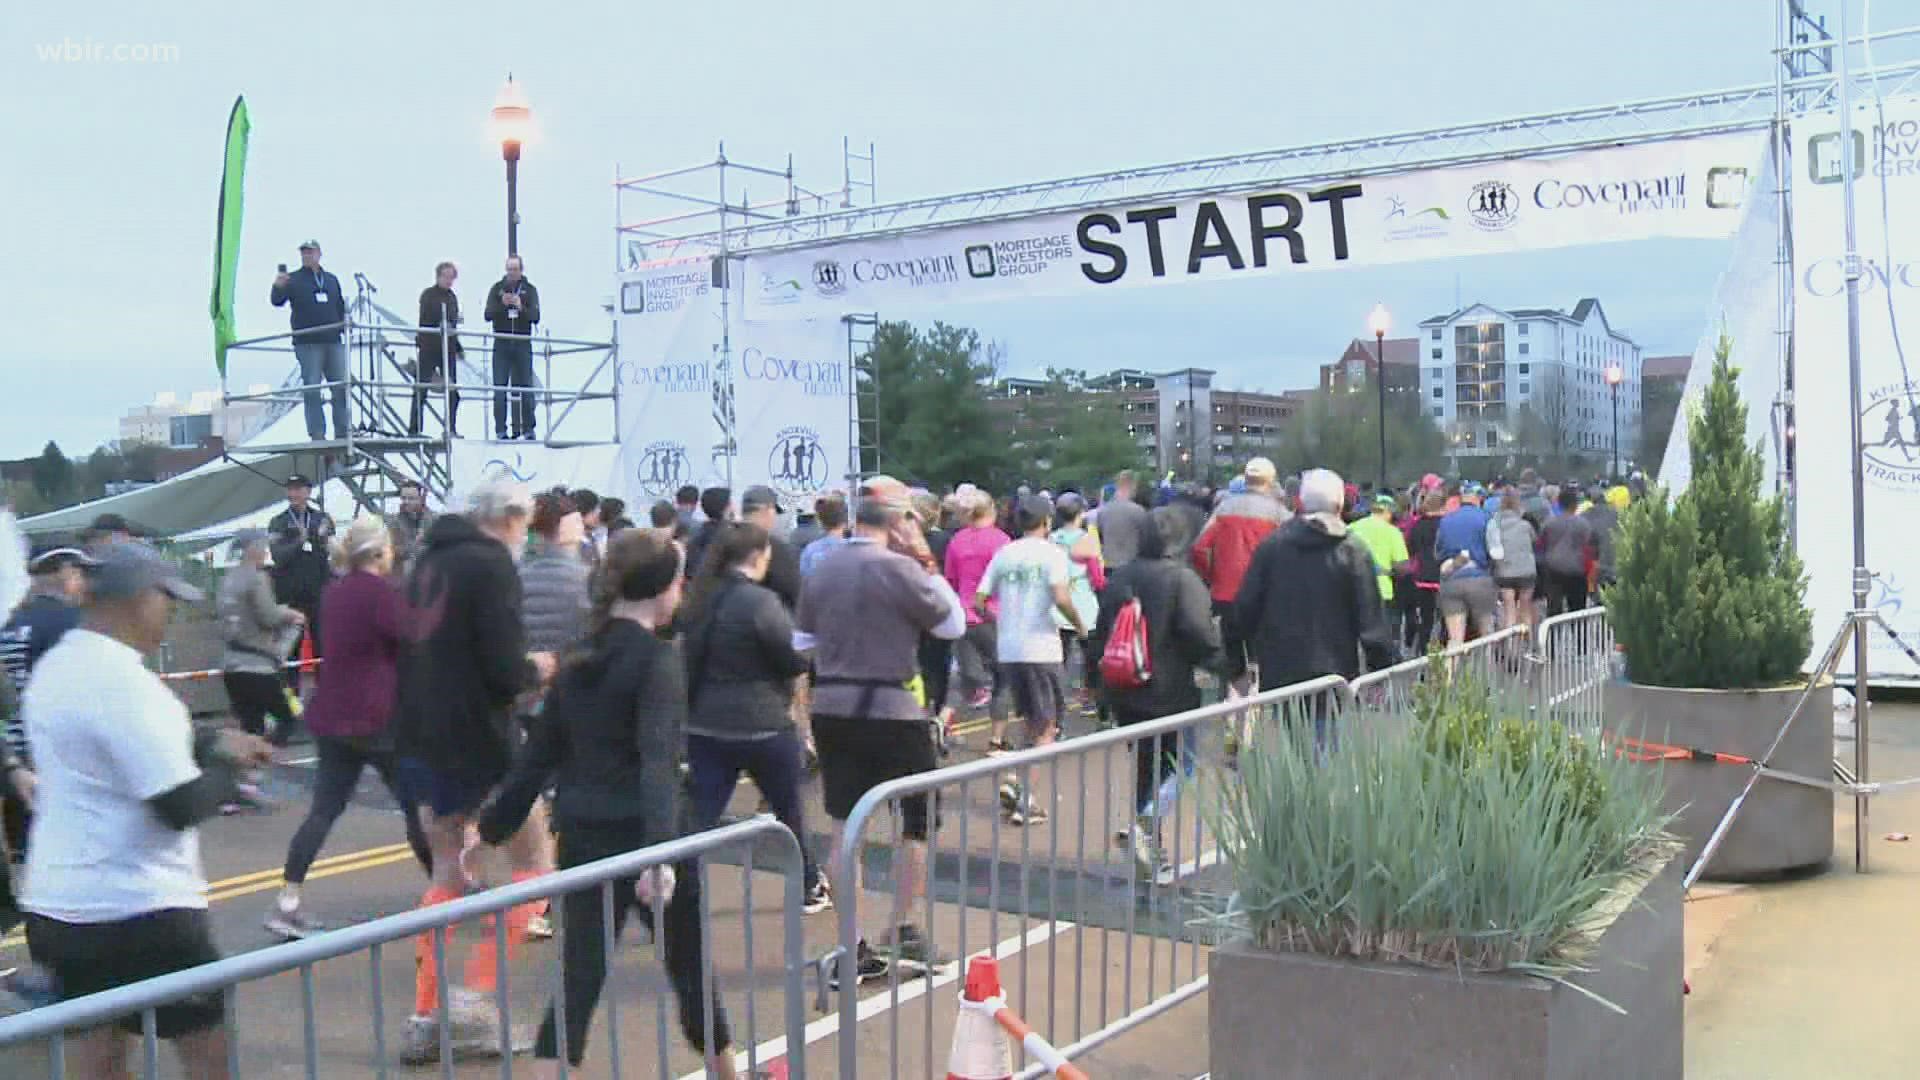 On Sunday, runners will hit the streets around Knoxville for the Covenant Health Marathon.